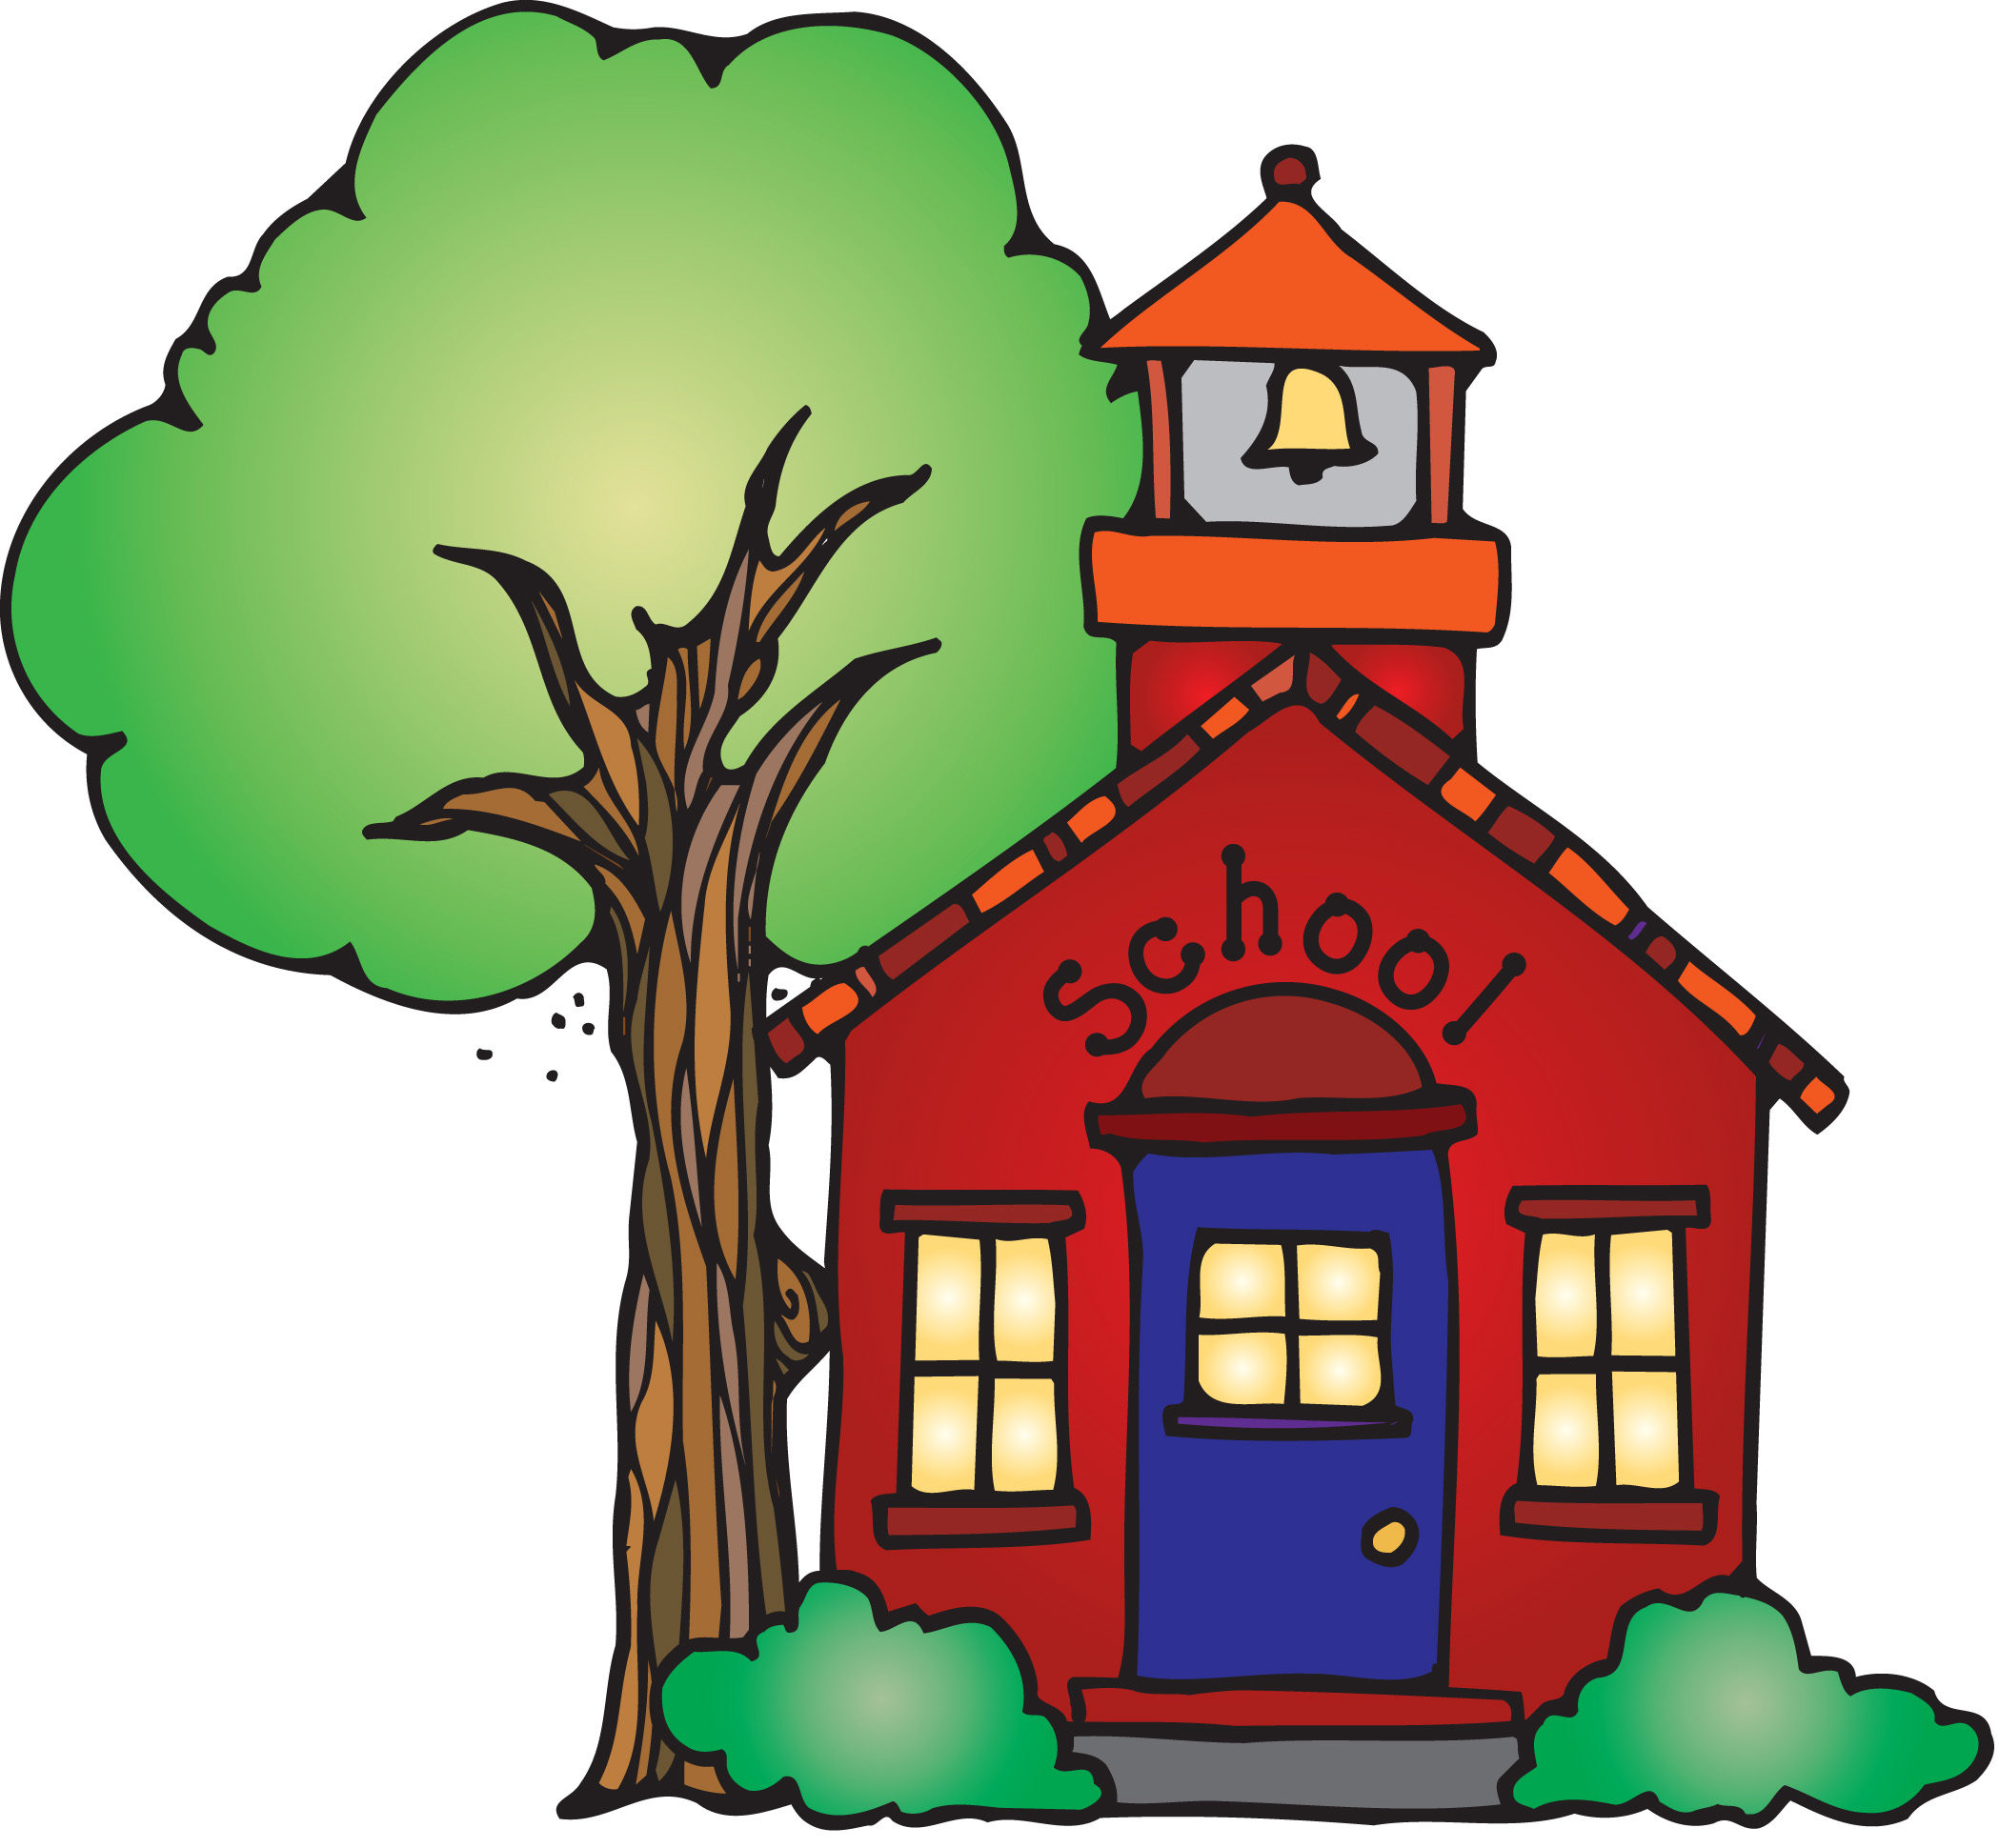 School house images free clipart 5